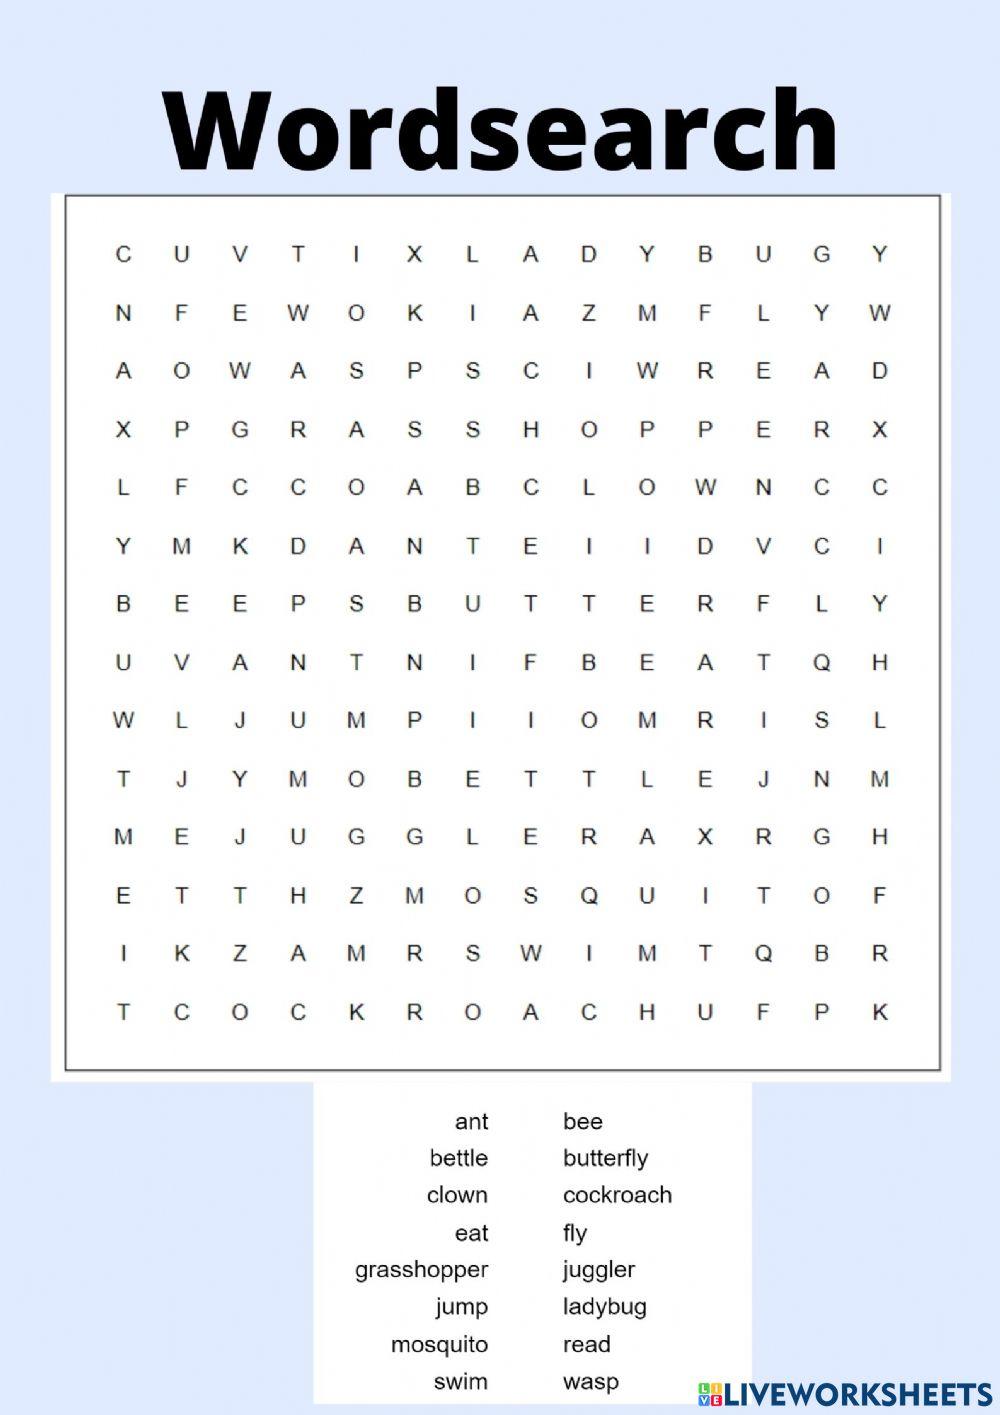 Wordsearch insects